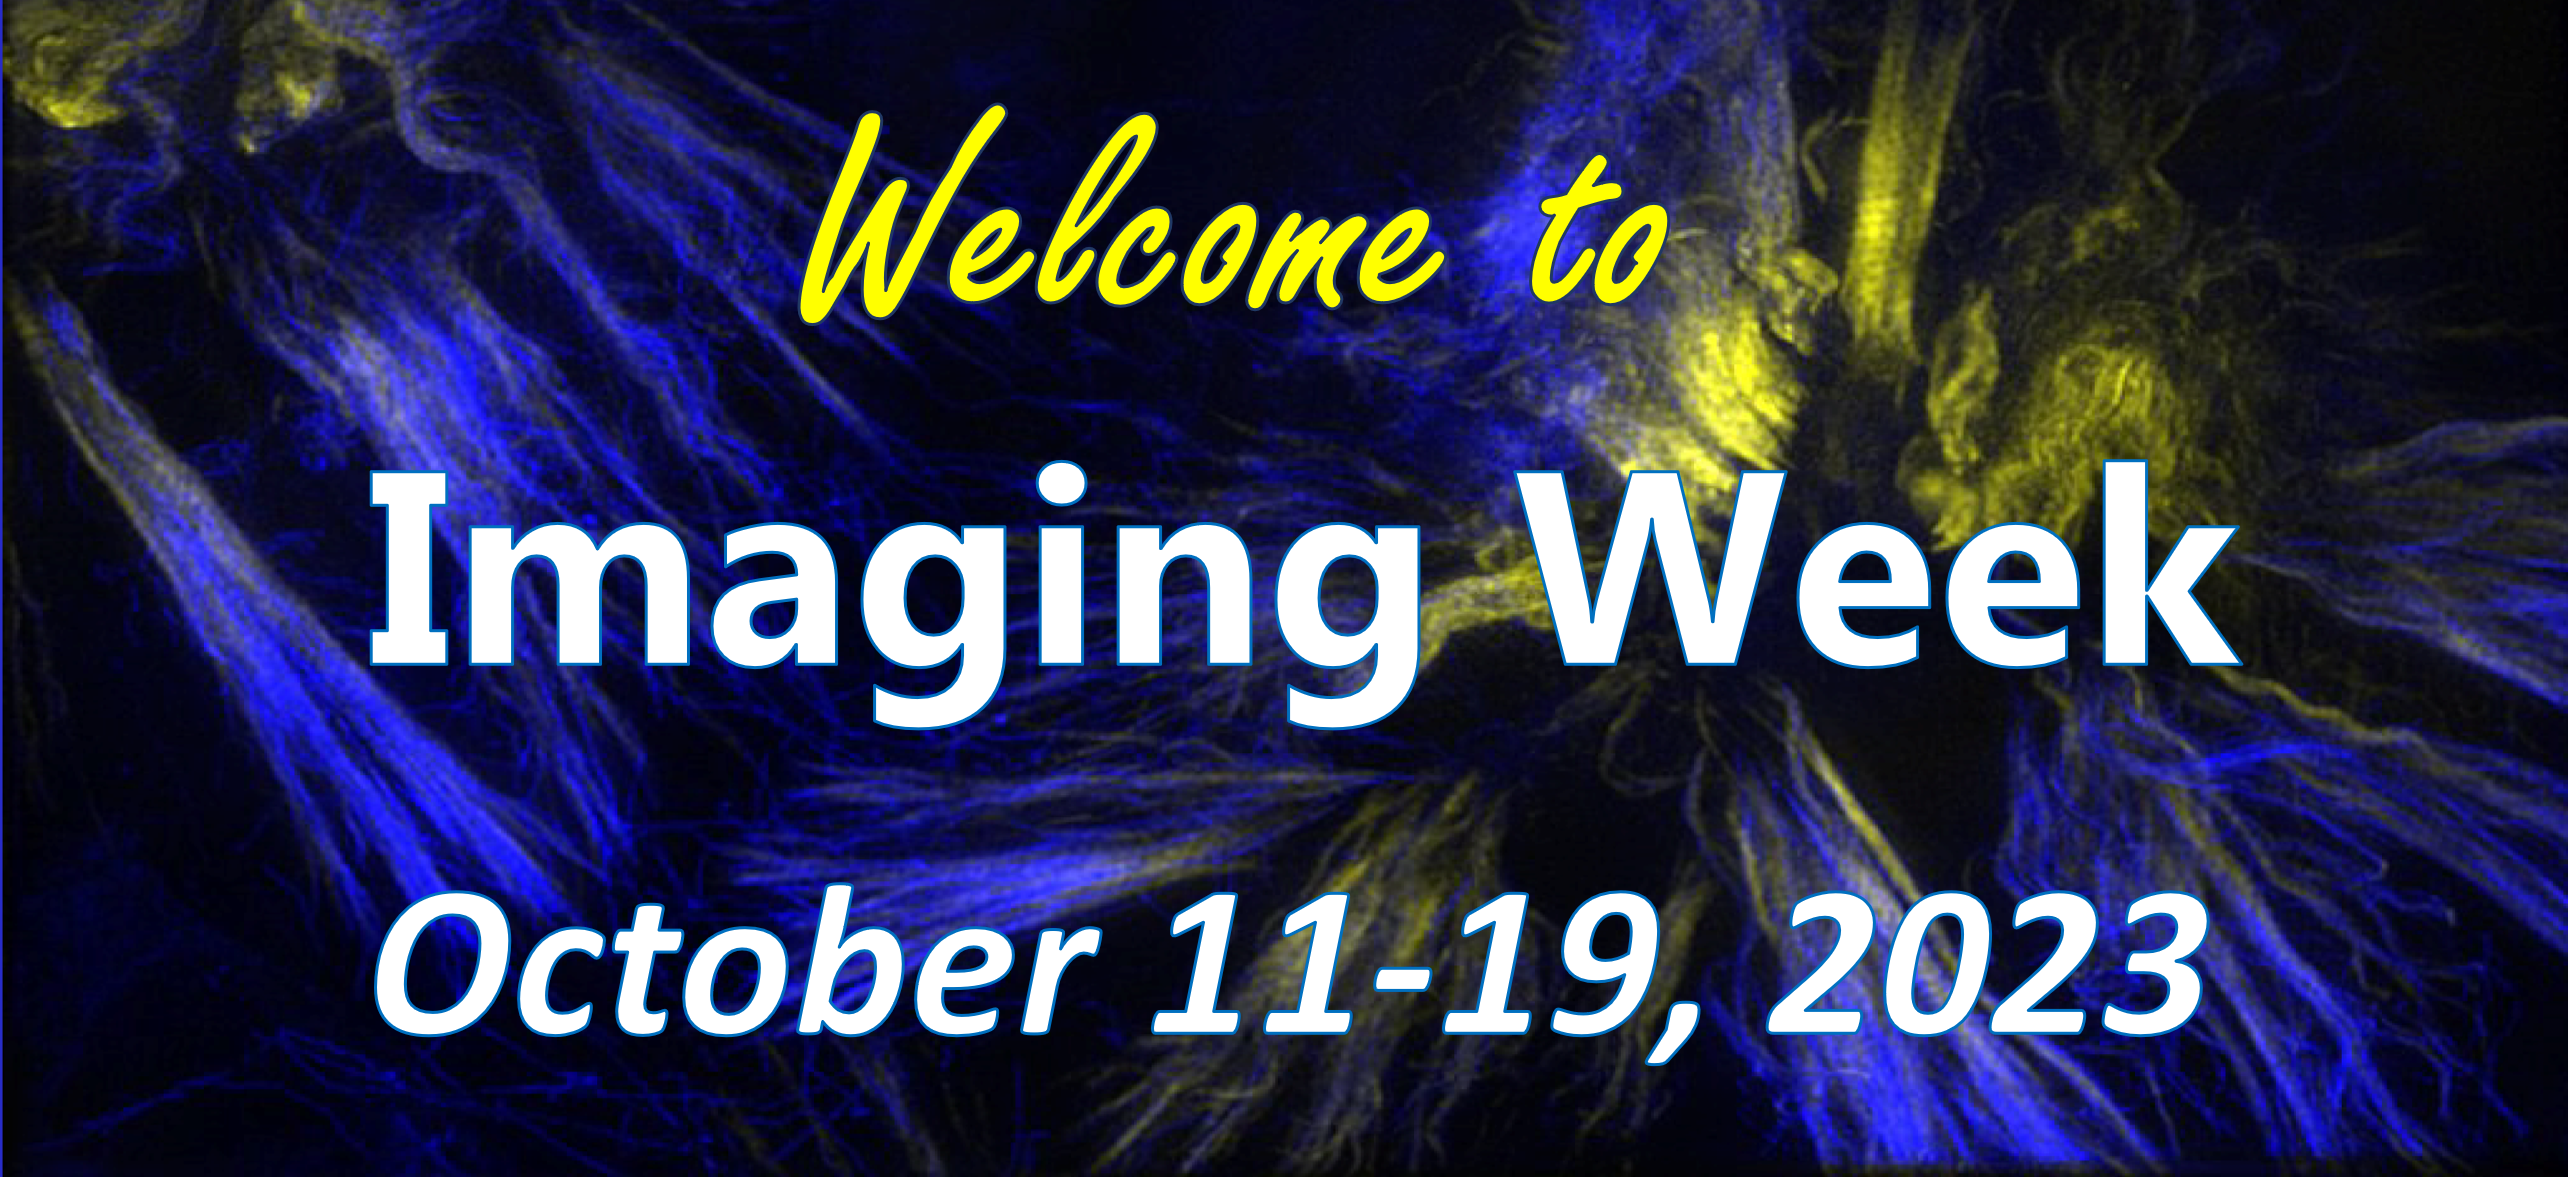 Welcome to Imaging Week 2023